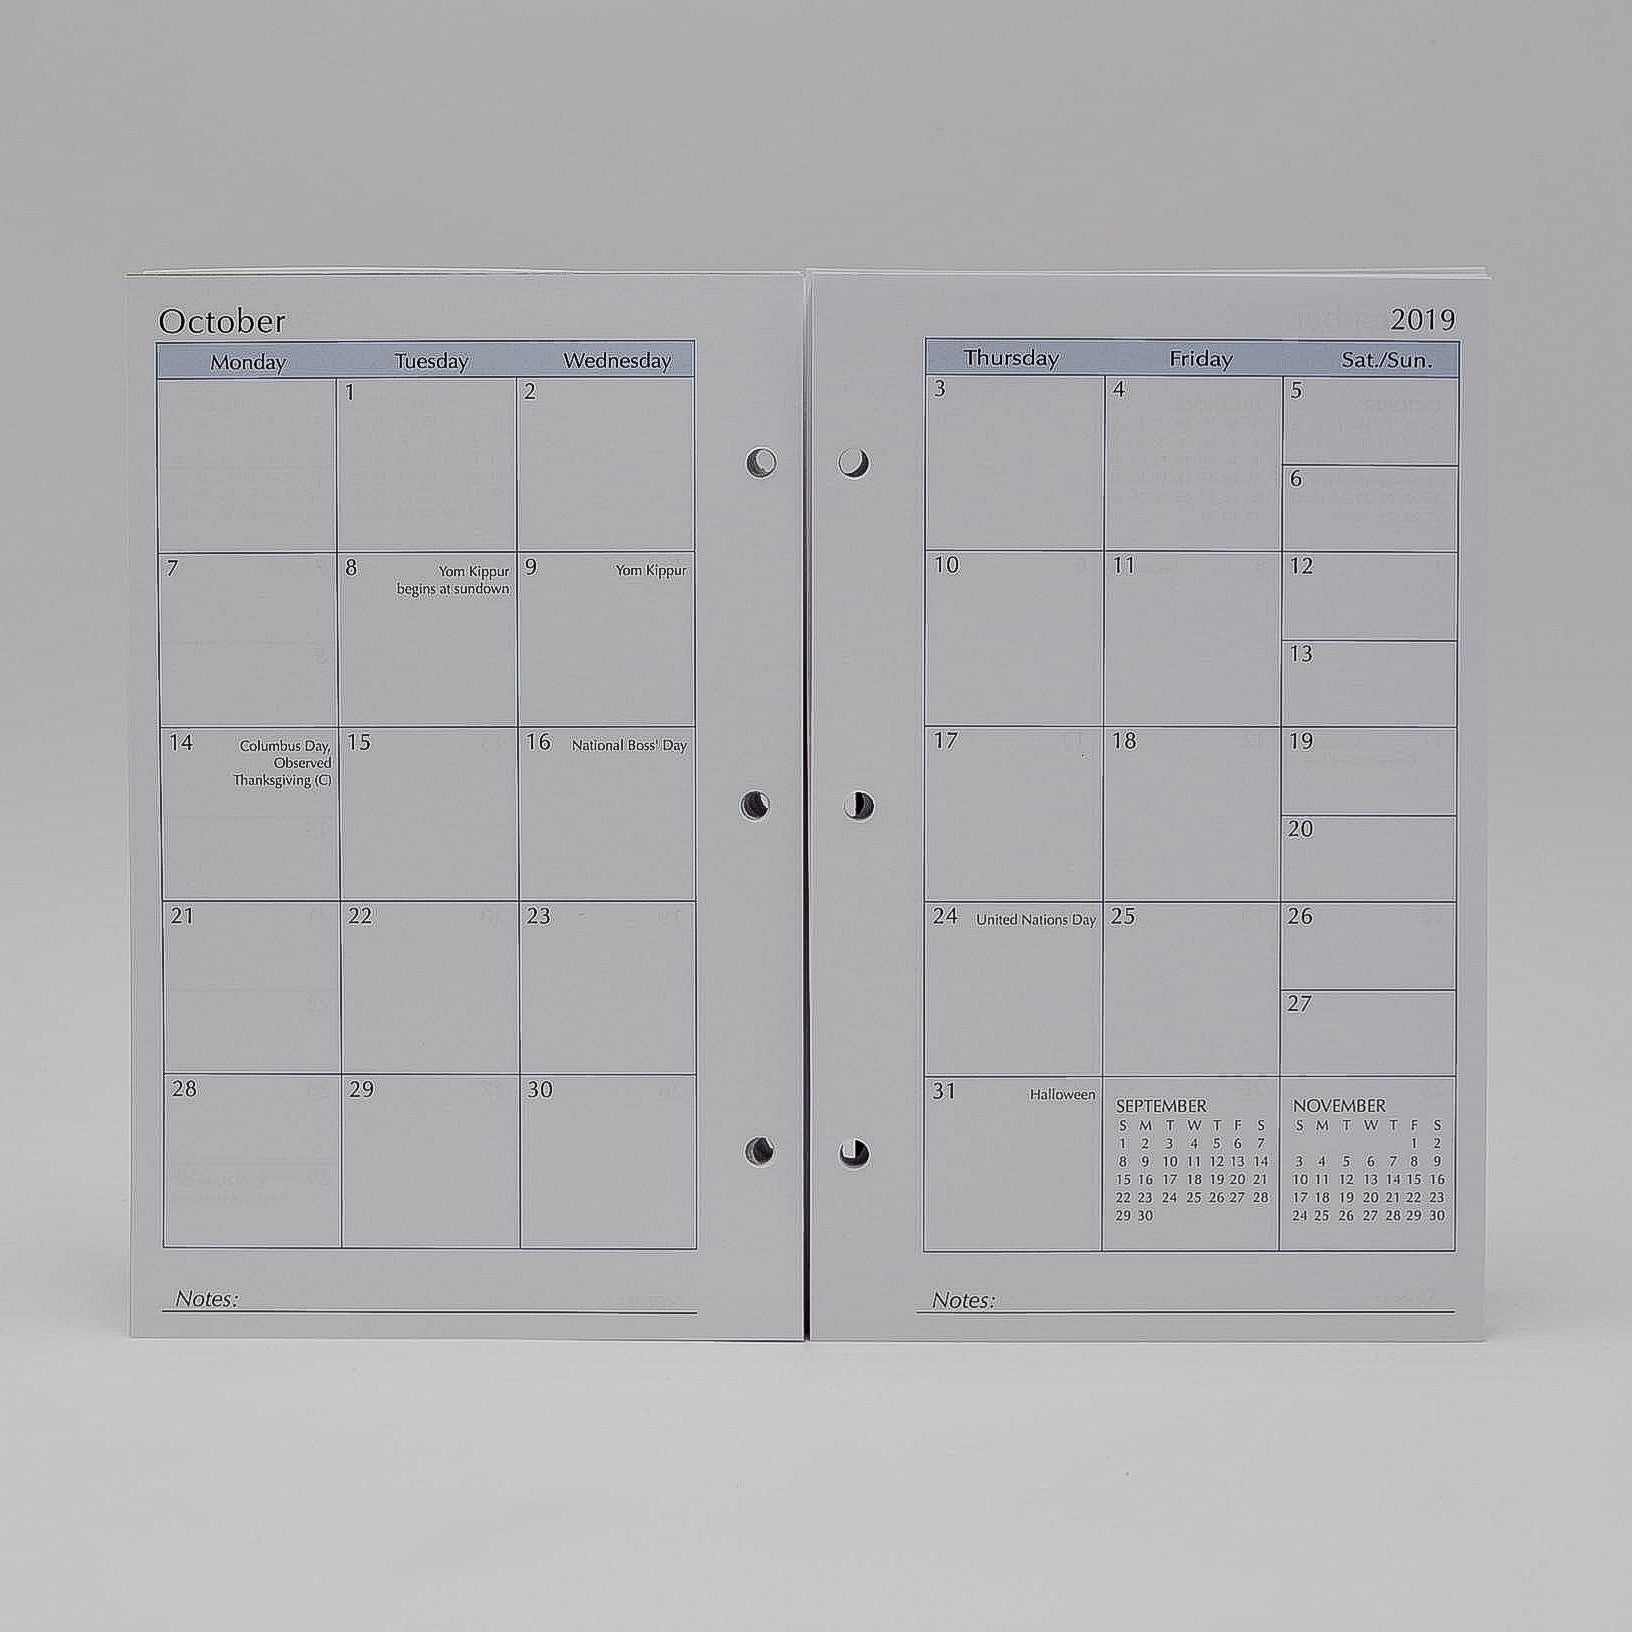 2022 2021 calendar MP58P3 3-HOLE PLANNER 2020 2019 WHITE MONTHLY WEEKLY CALENDAR LOOSE LEAF LOOSE LEAF PLANNER  2020 2019 calendar refill insert loose leaf paper organizer agenda replacement gherka Bosca full sheet of a paper Sungraphix ivory monthly weekly format month-at-a-glance week-at-a-glance loose leaf 3 ring  made in the USA agenda organizer 